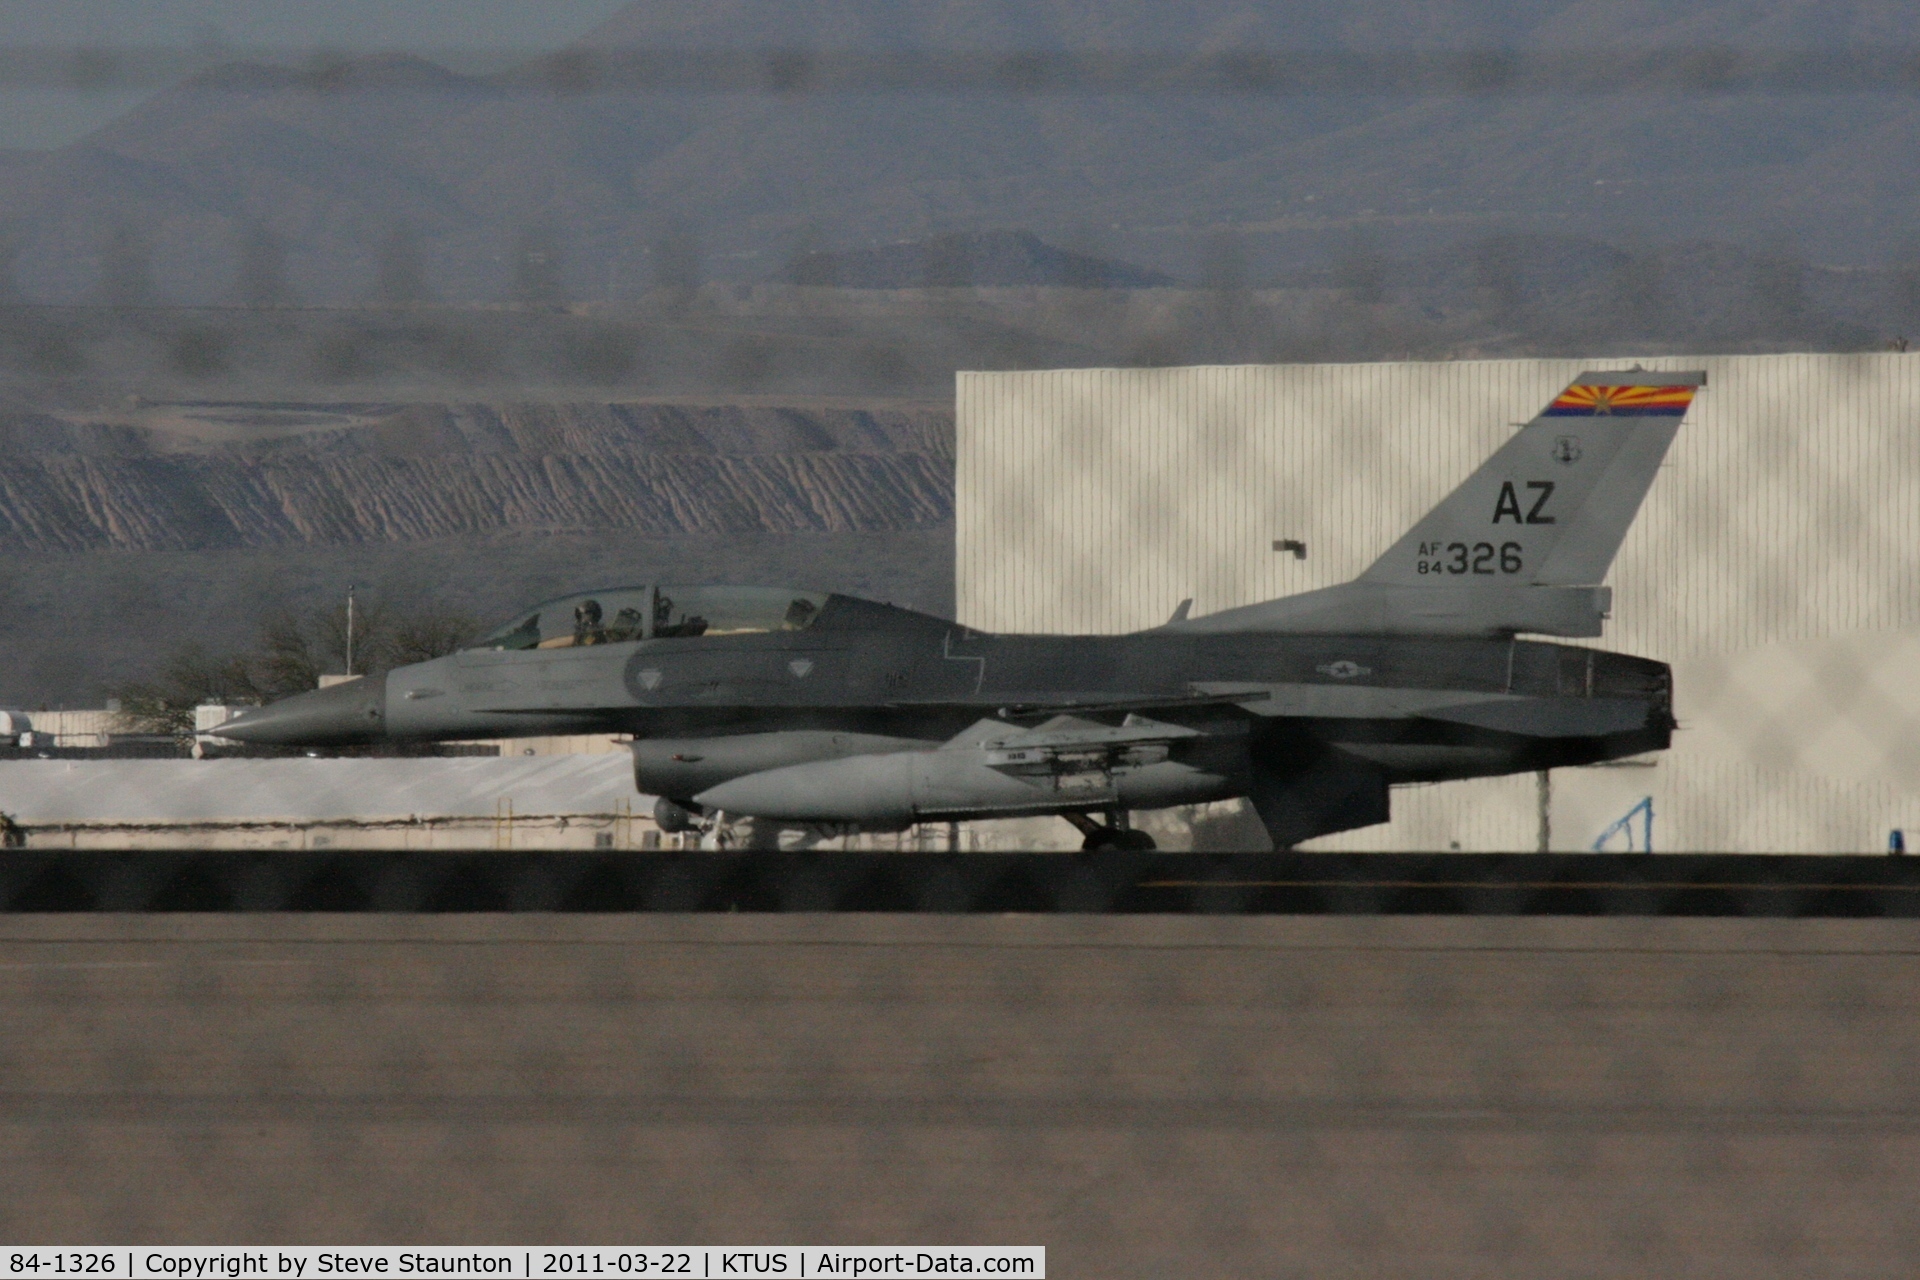 84-1326, 1984 General Dynamics F-16D Fighting Falcon C/N 5D-20, Taken at Tucson International Airport, in March 2011 whilst on an Aeroprint Aviation tour